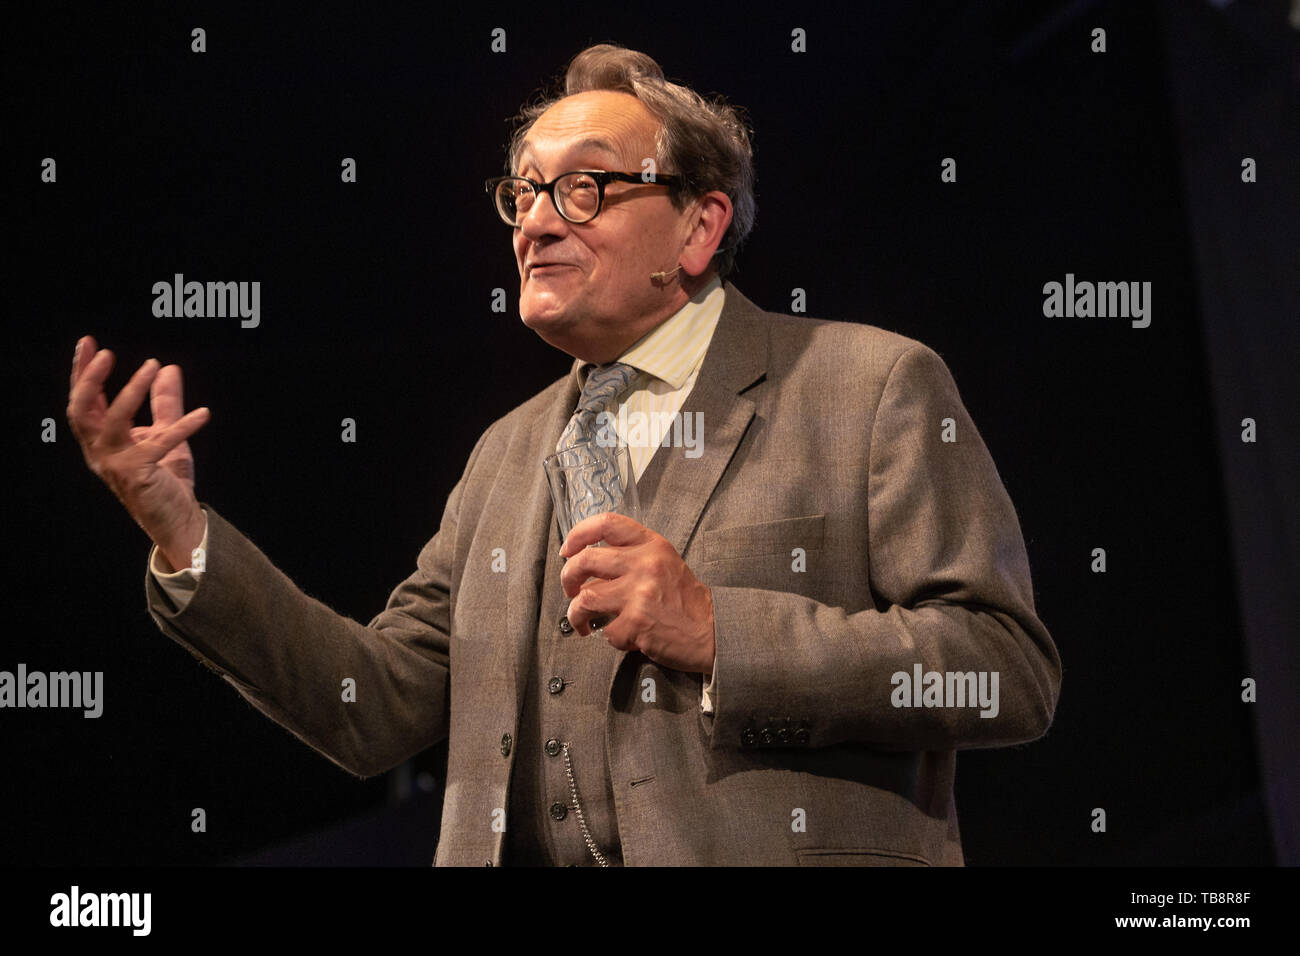 The Hay Festival, Hay on Wye, Wales UK , Friday 31st May 2019.  Felipe Fernández-Armesto, award-winning popular historian,  on stage at the Hay Festival 2019.  The festival, now in its 32nd year, held annually in the small town of Hay on Wye on the Wales - England border,  attracts the finest writers, politicians and intellectuals from  across the globe for 10 days of talks and discussions, celebrating the best of the written word and critical debate  Photo © Keith Morris / Alamy Live News Stock Photo